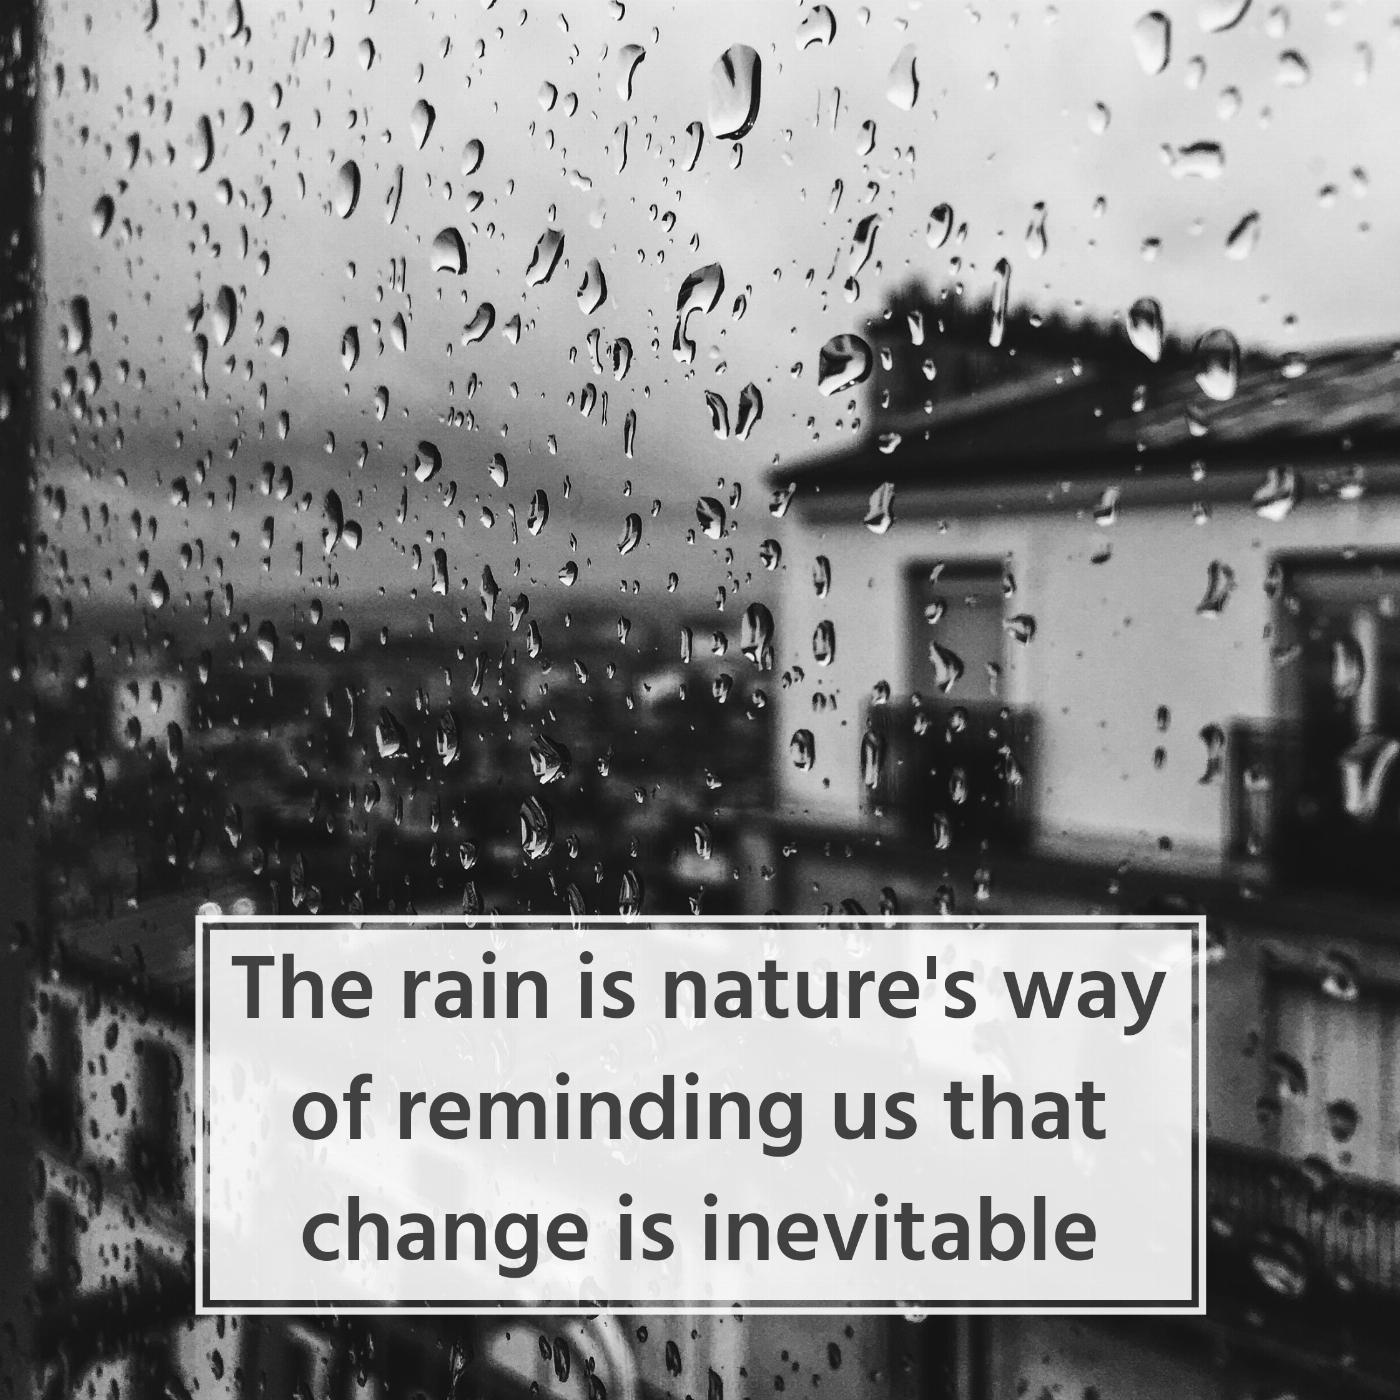 The rain is nature's way of reminding us that change is inevitable